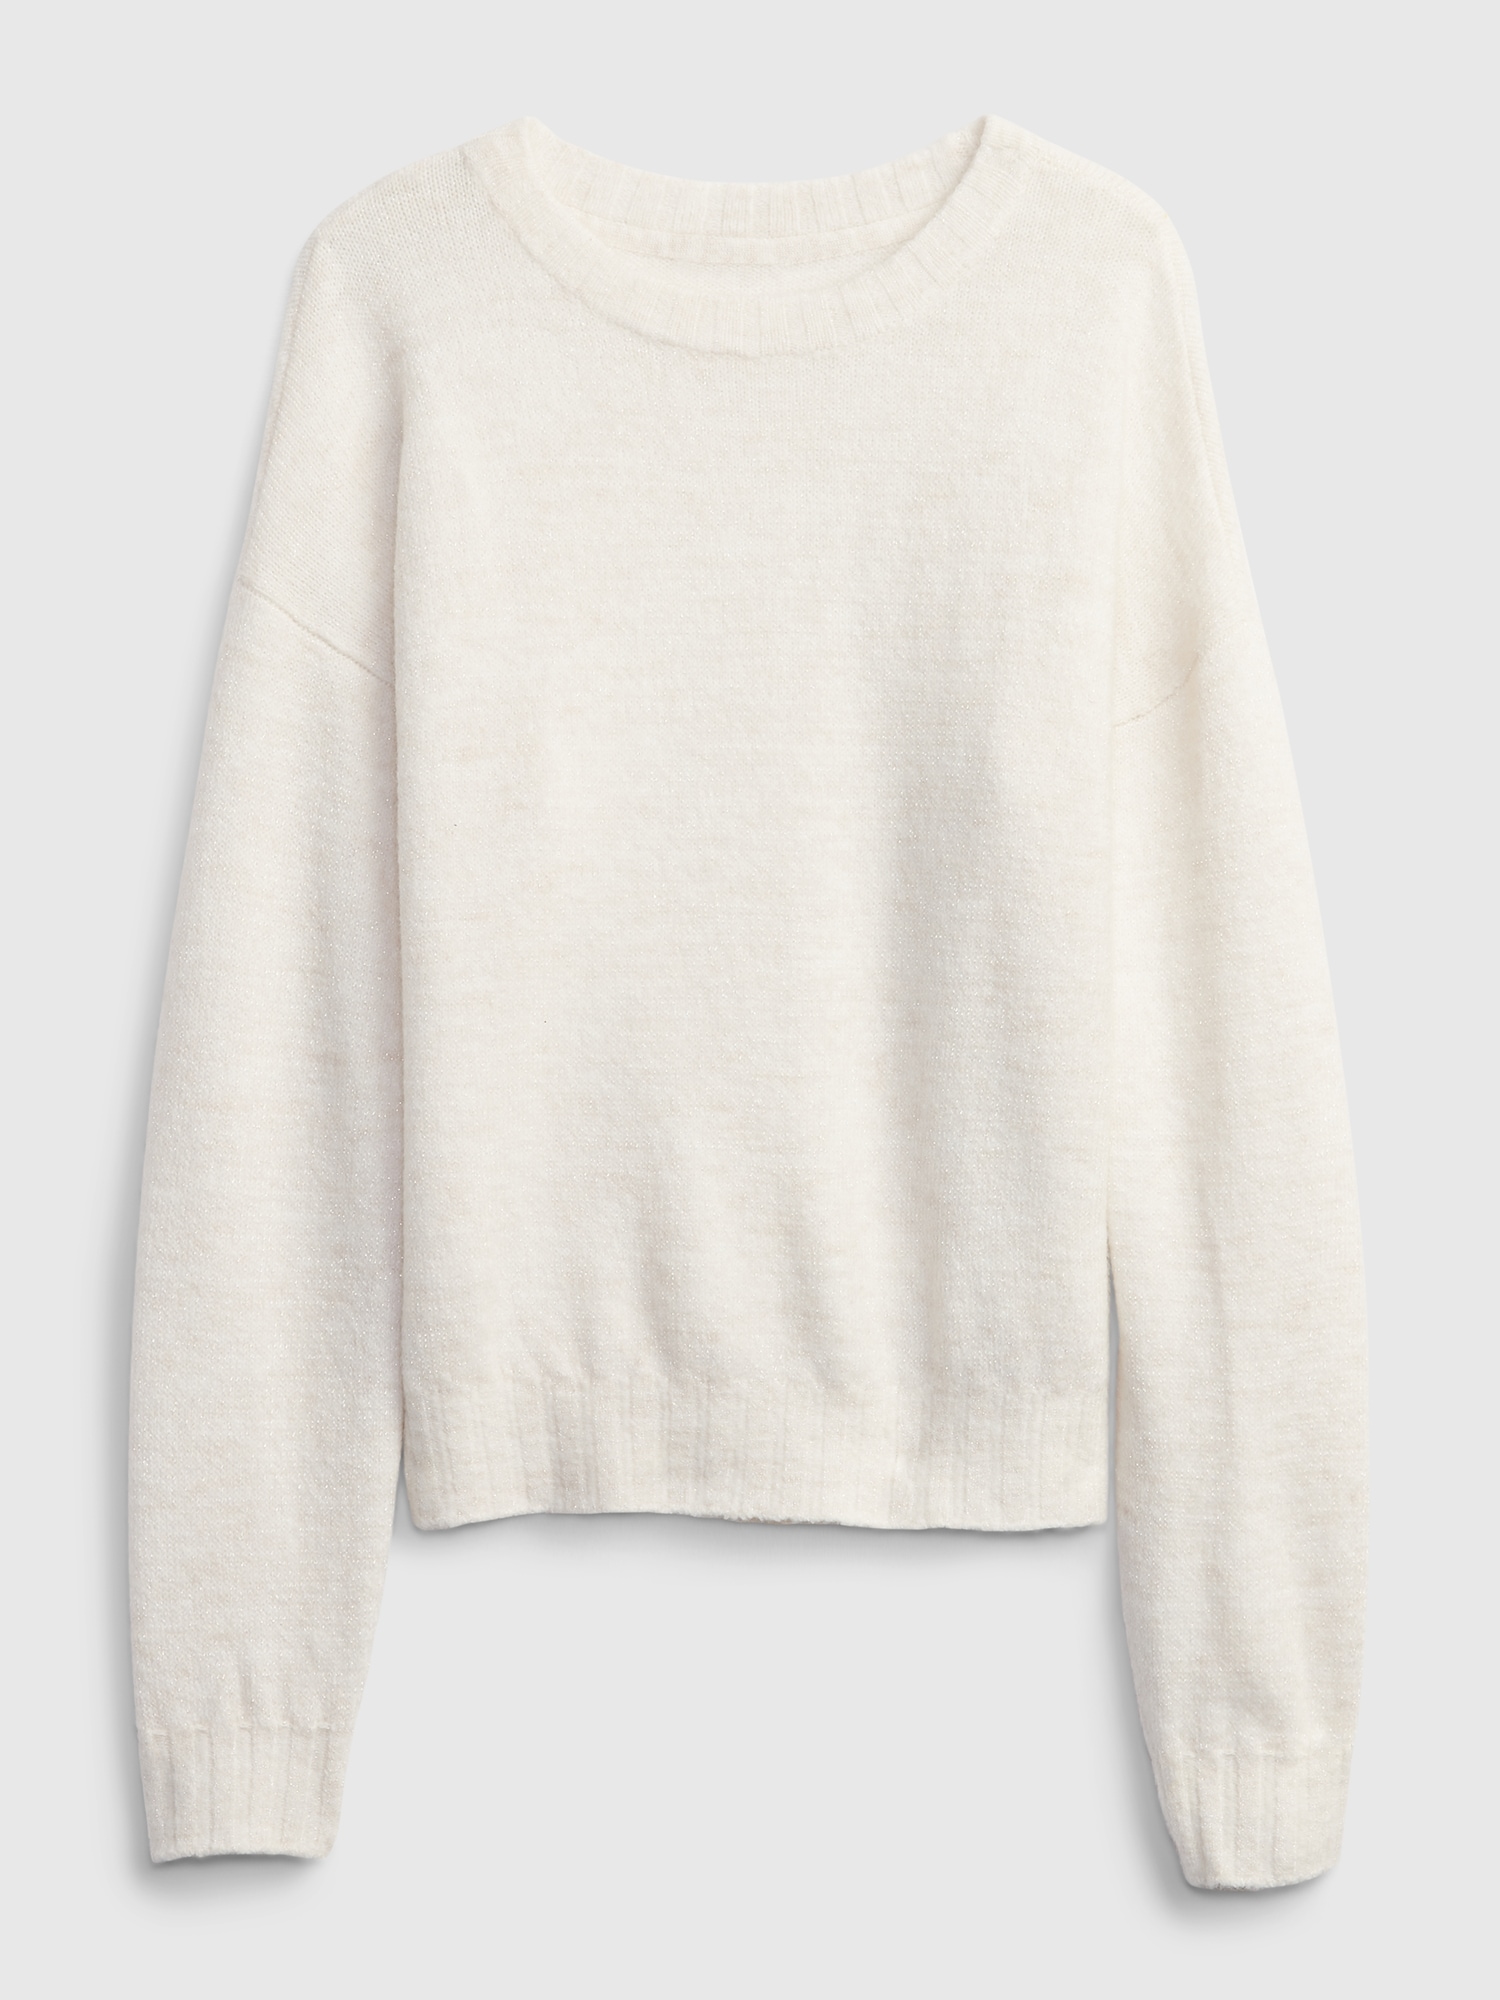 VGUC Junior's Hollister M Gray & White Sweater for Sale in North